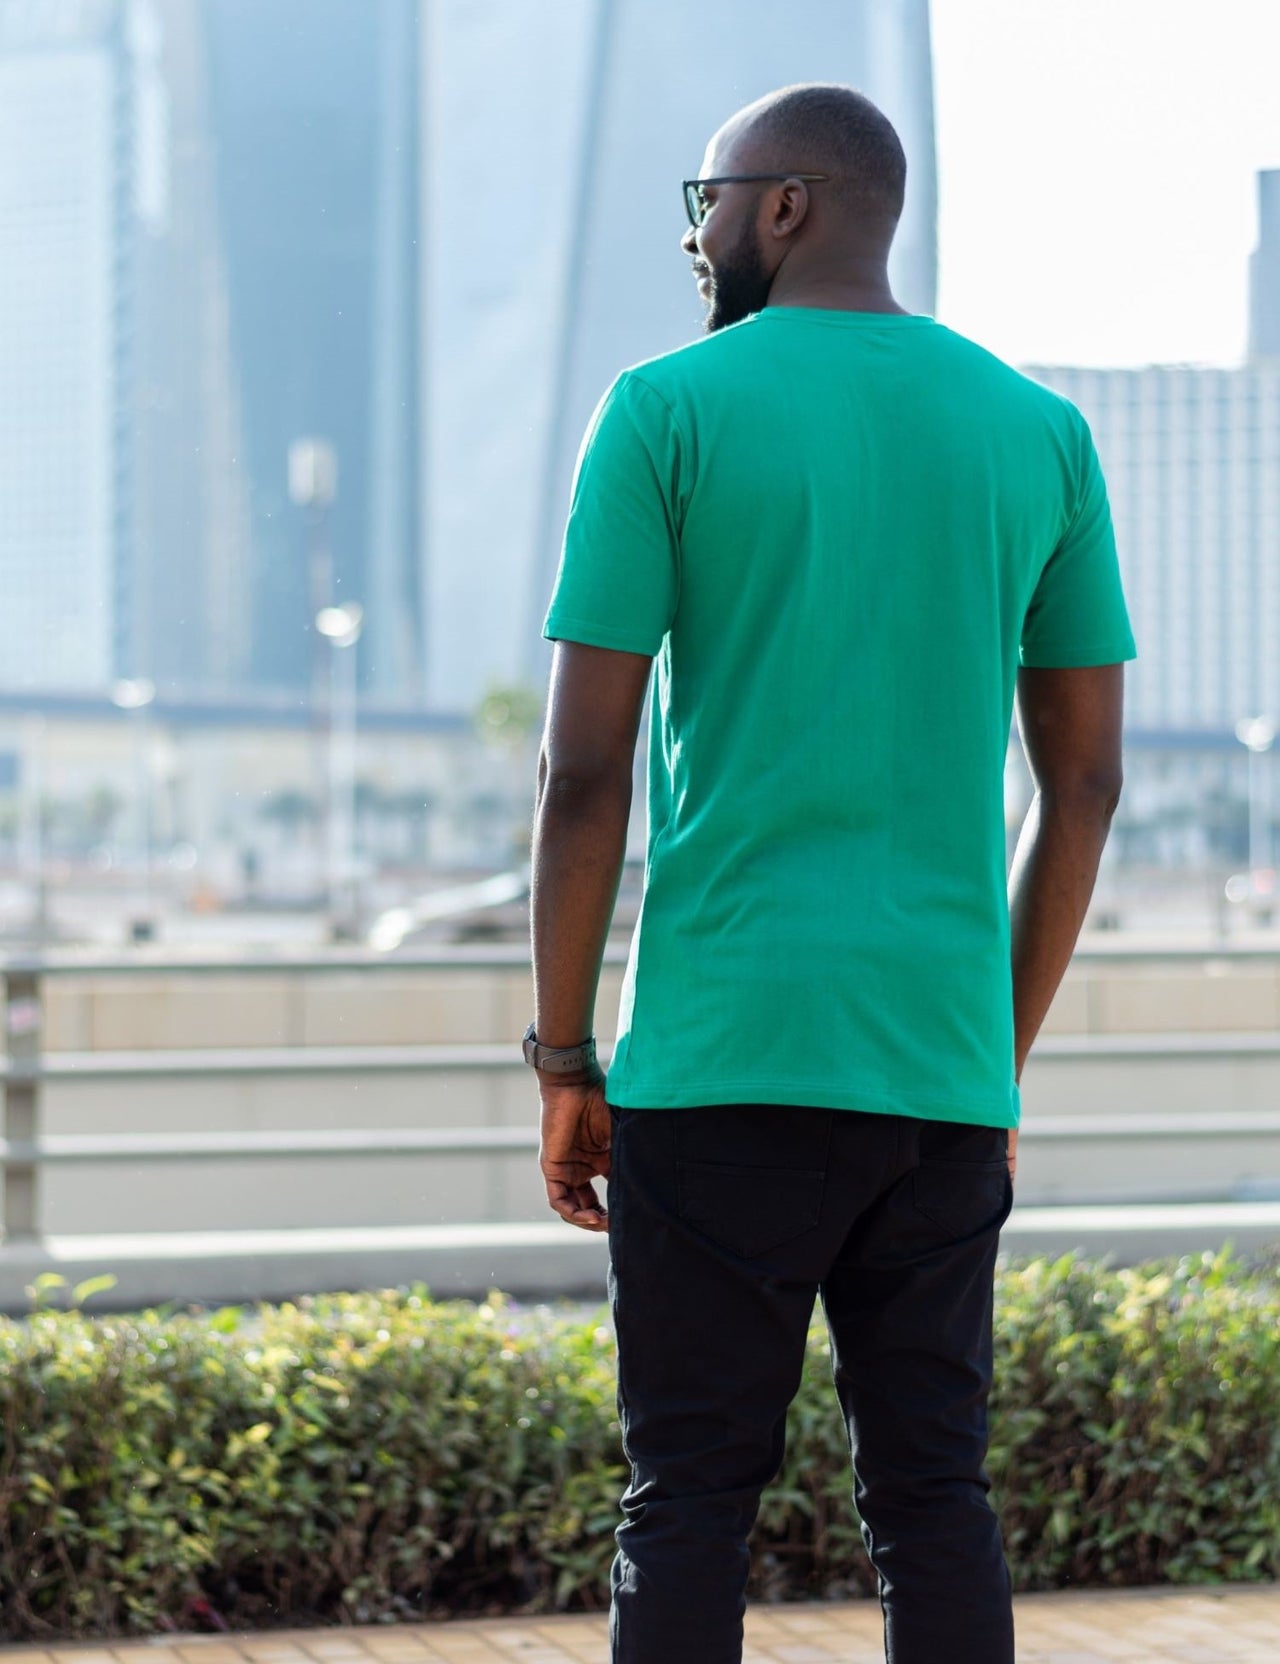 A shot from behind of a tall skinny guy in the street and wearing a green tall slim fit t-shirt.